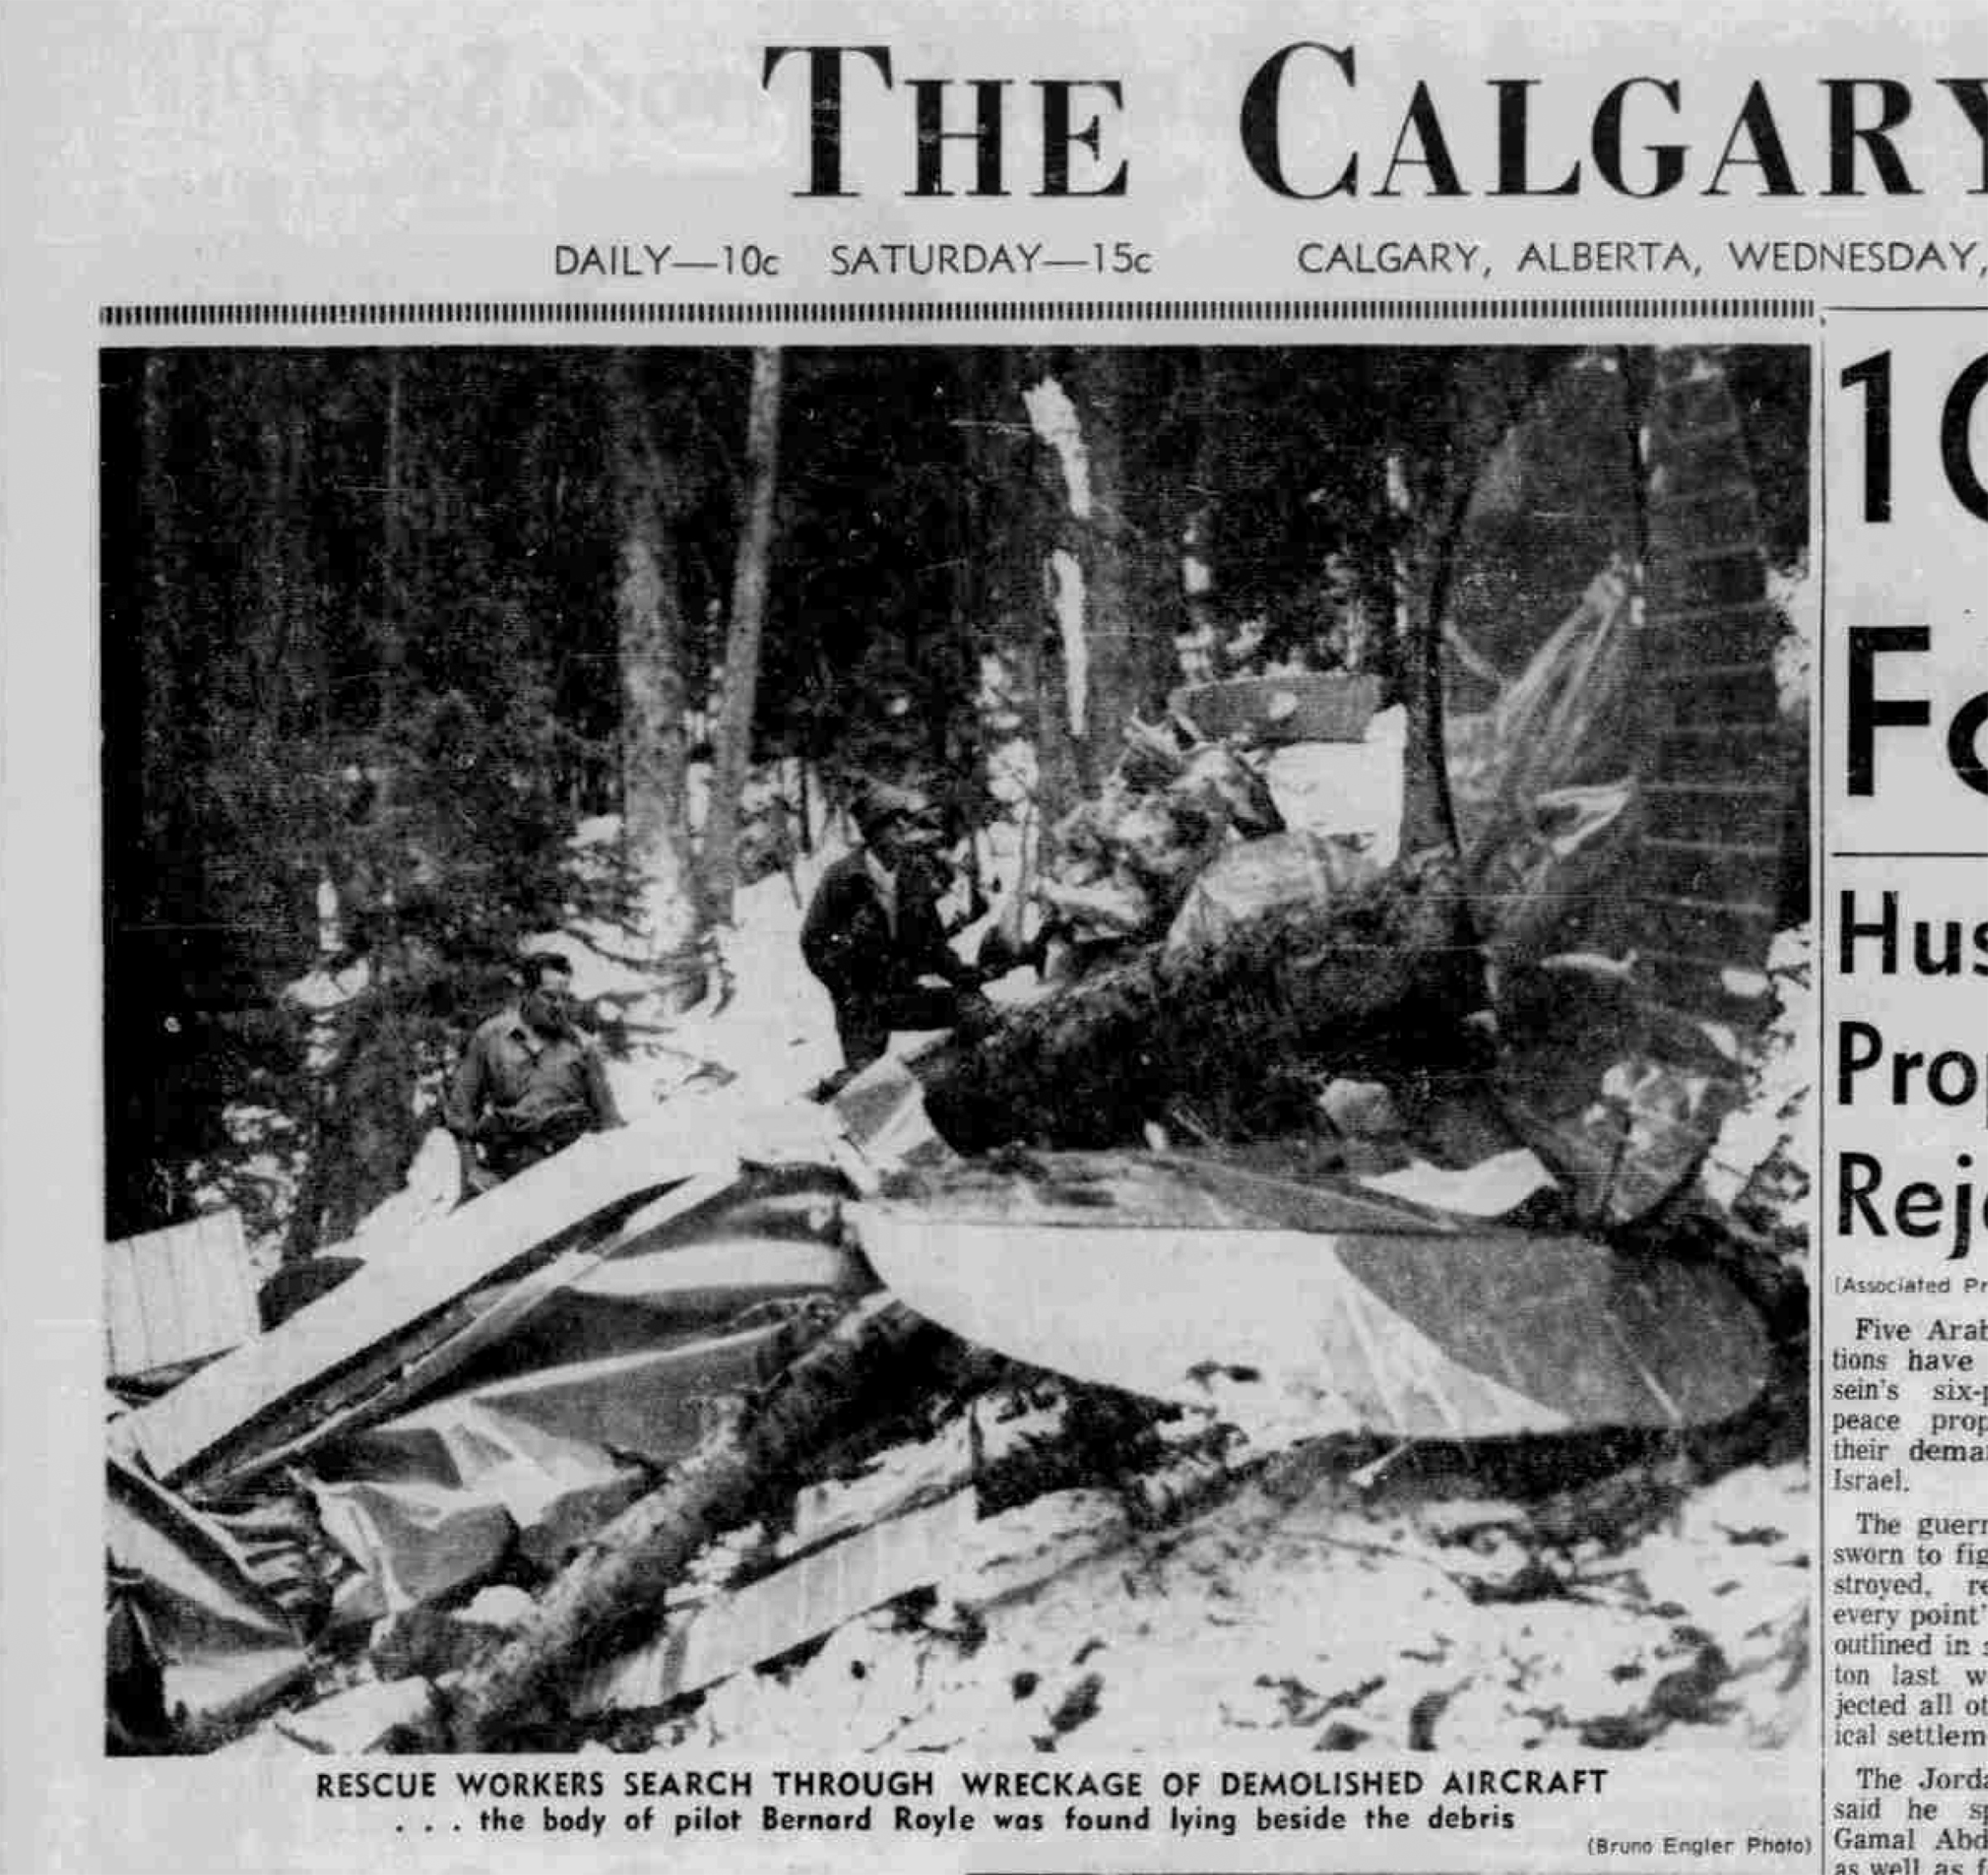 Scene of a Cessna crash in the mountains of British Columbia, Canada,  captured on the front page of The Calgary Herald in April 1969. (Courtesy Glenbow Western Research Centre)